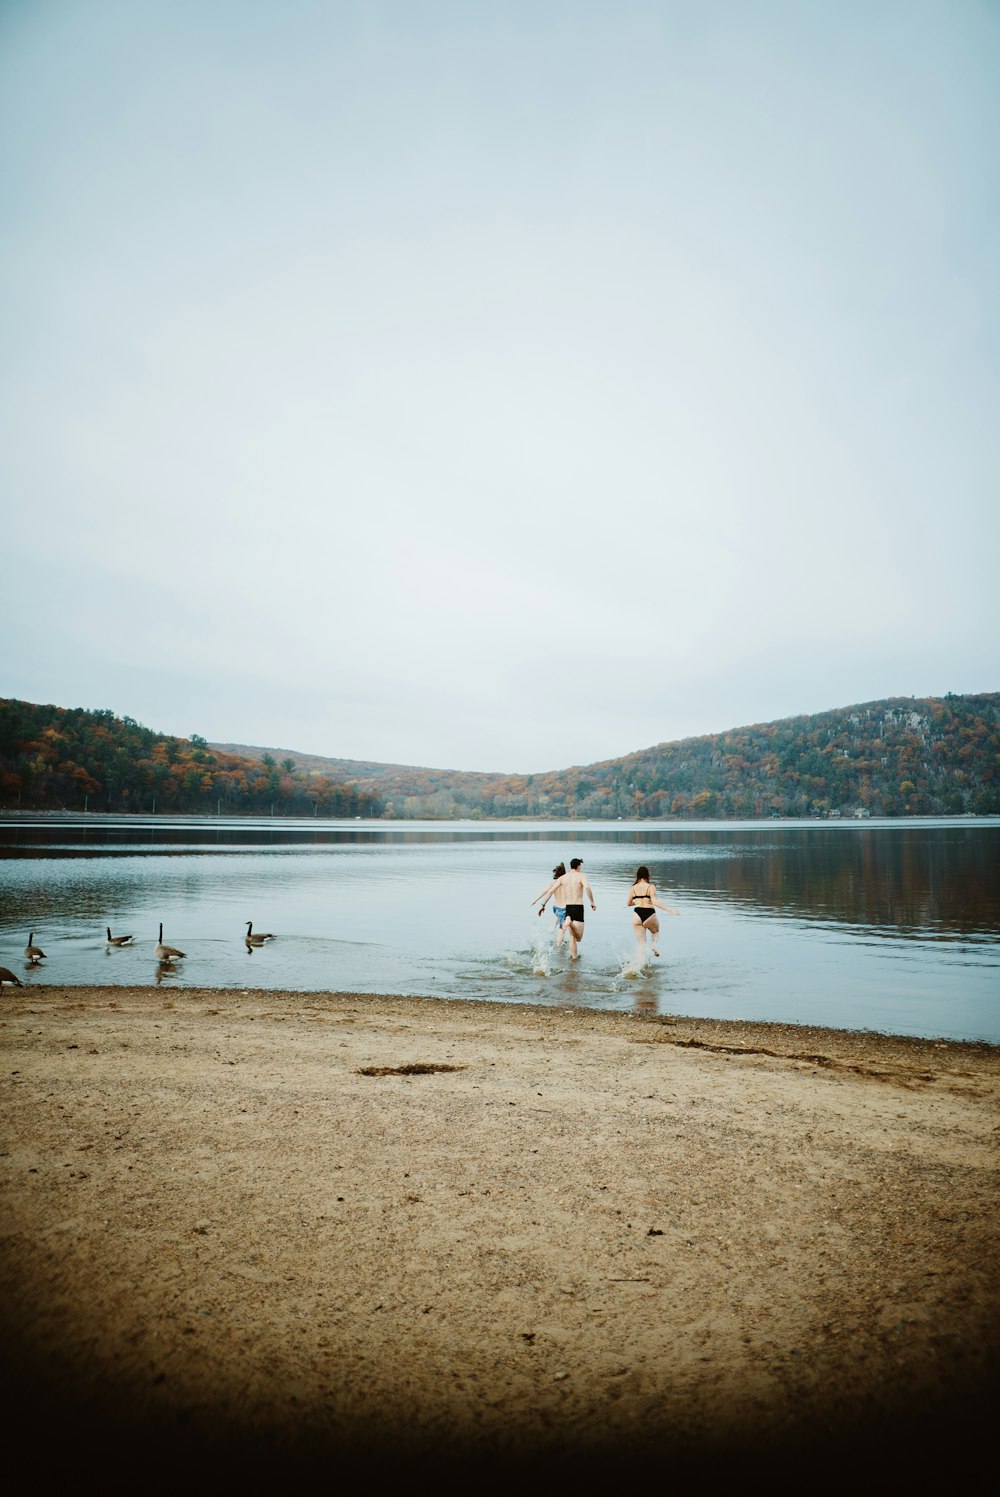 two people are wading in the water with ducks